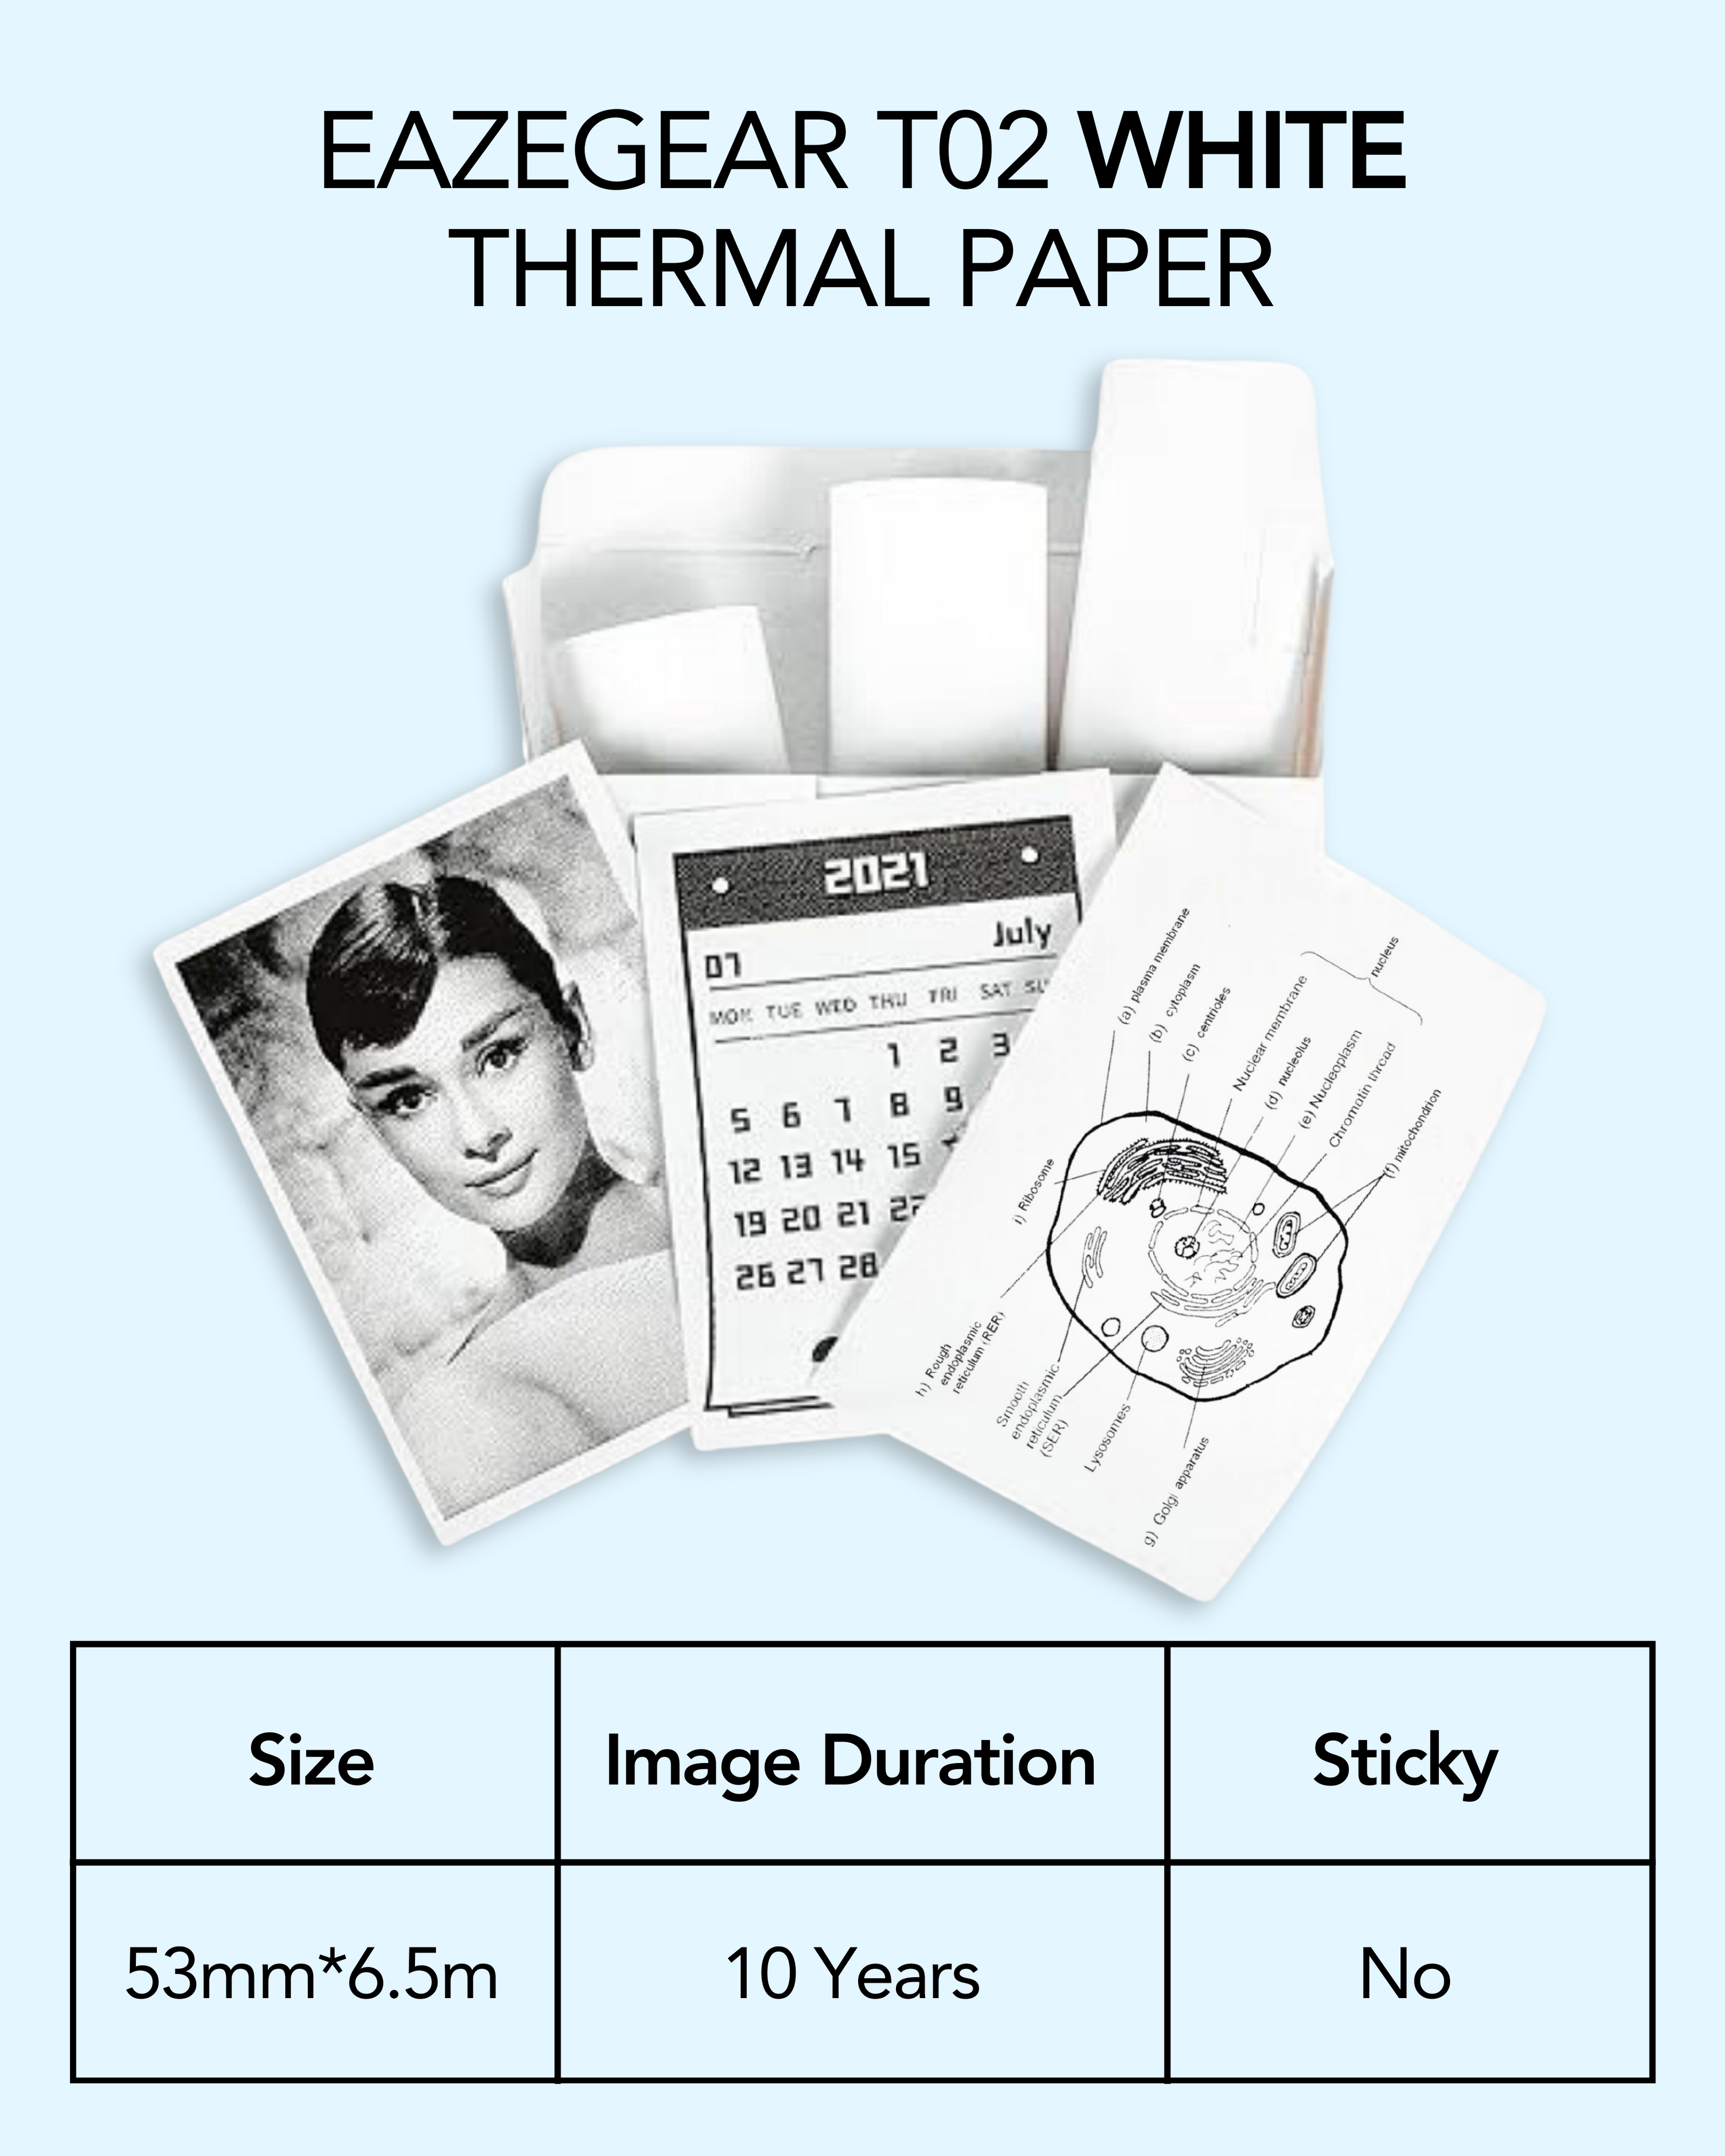 EazeGear_T02_White_Thermal_Paper_Non_sticky